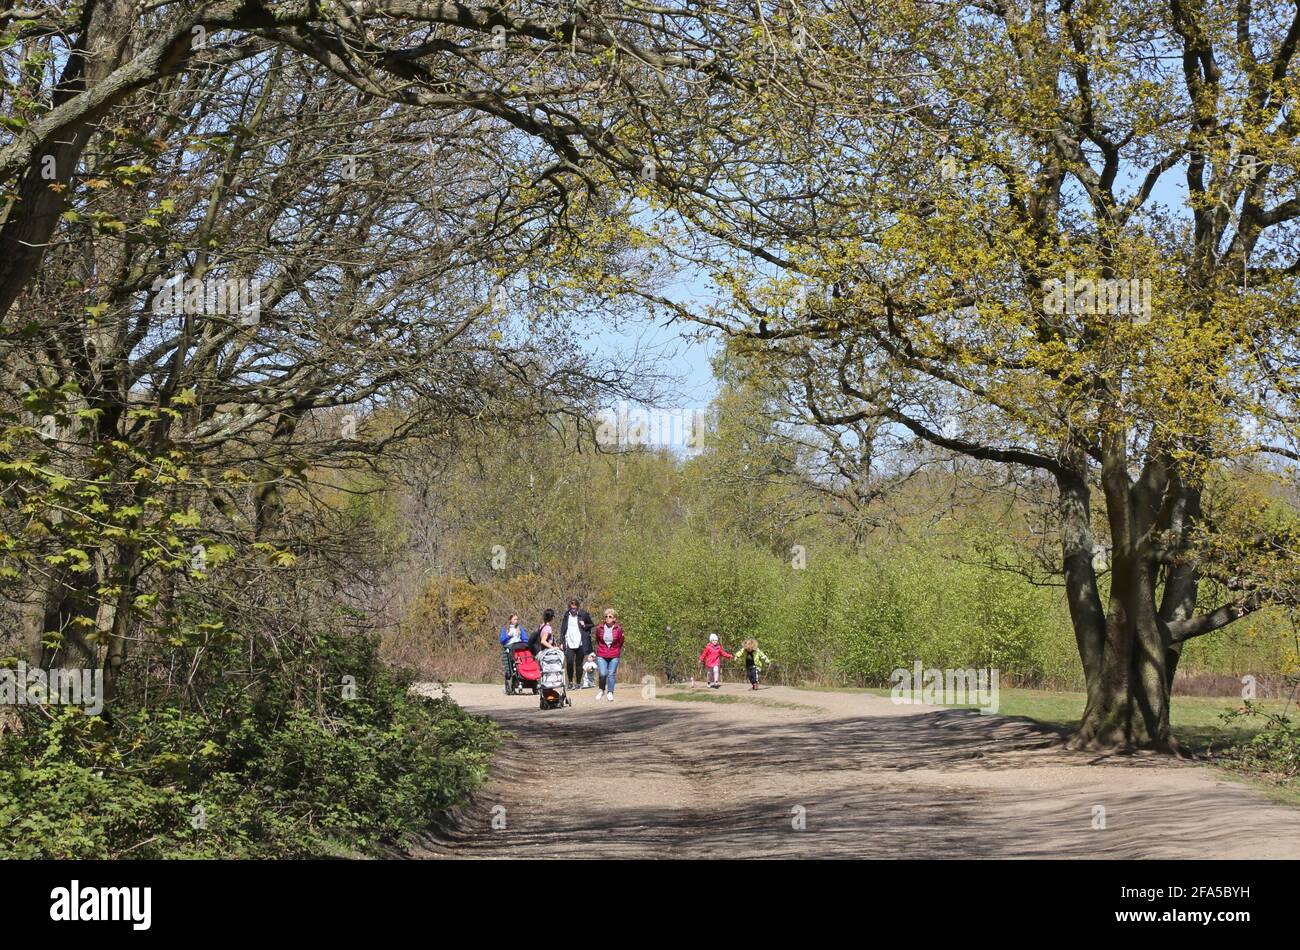 A family group walking through woods on Wimbledon Common, south west London, UK. Sunny, spring day. Stock Photo